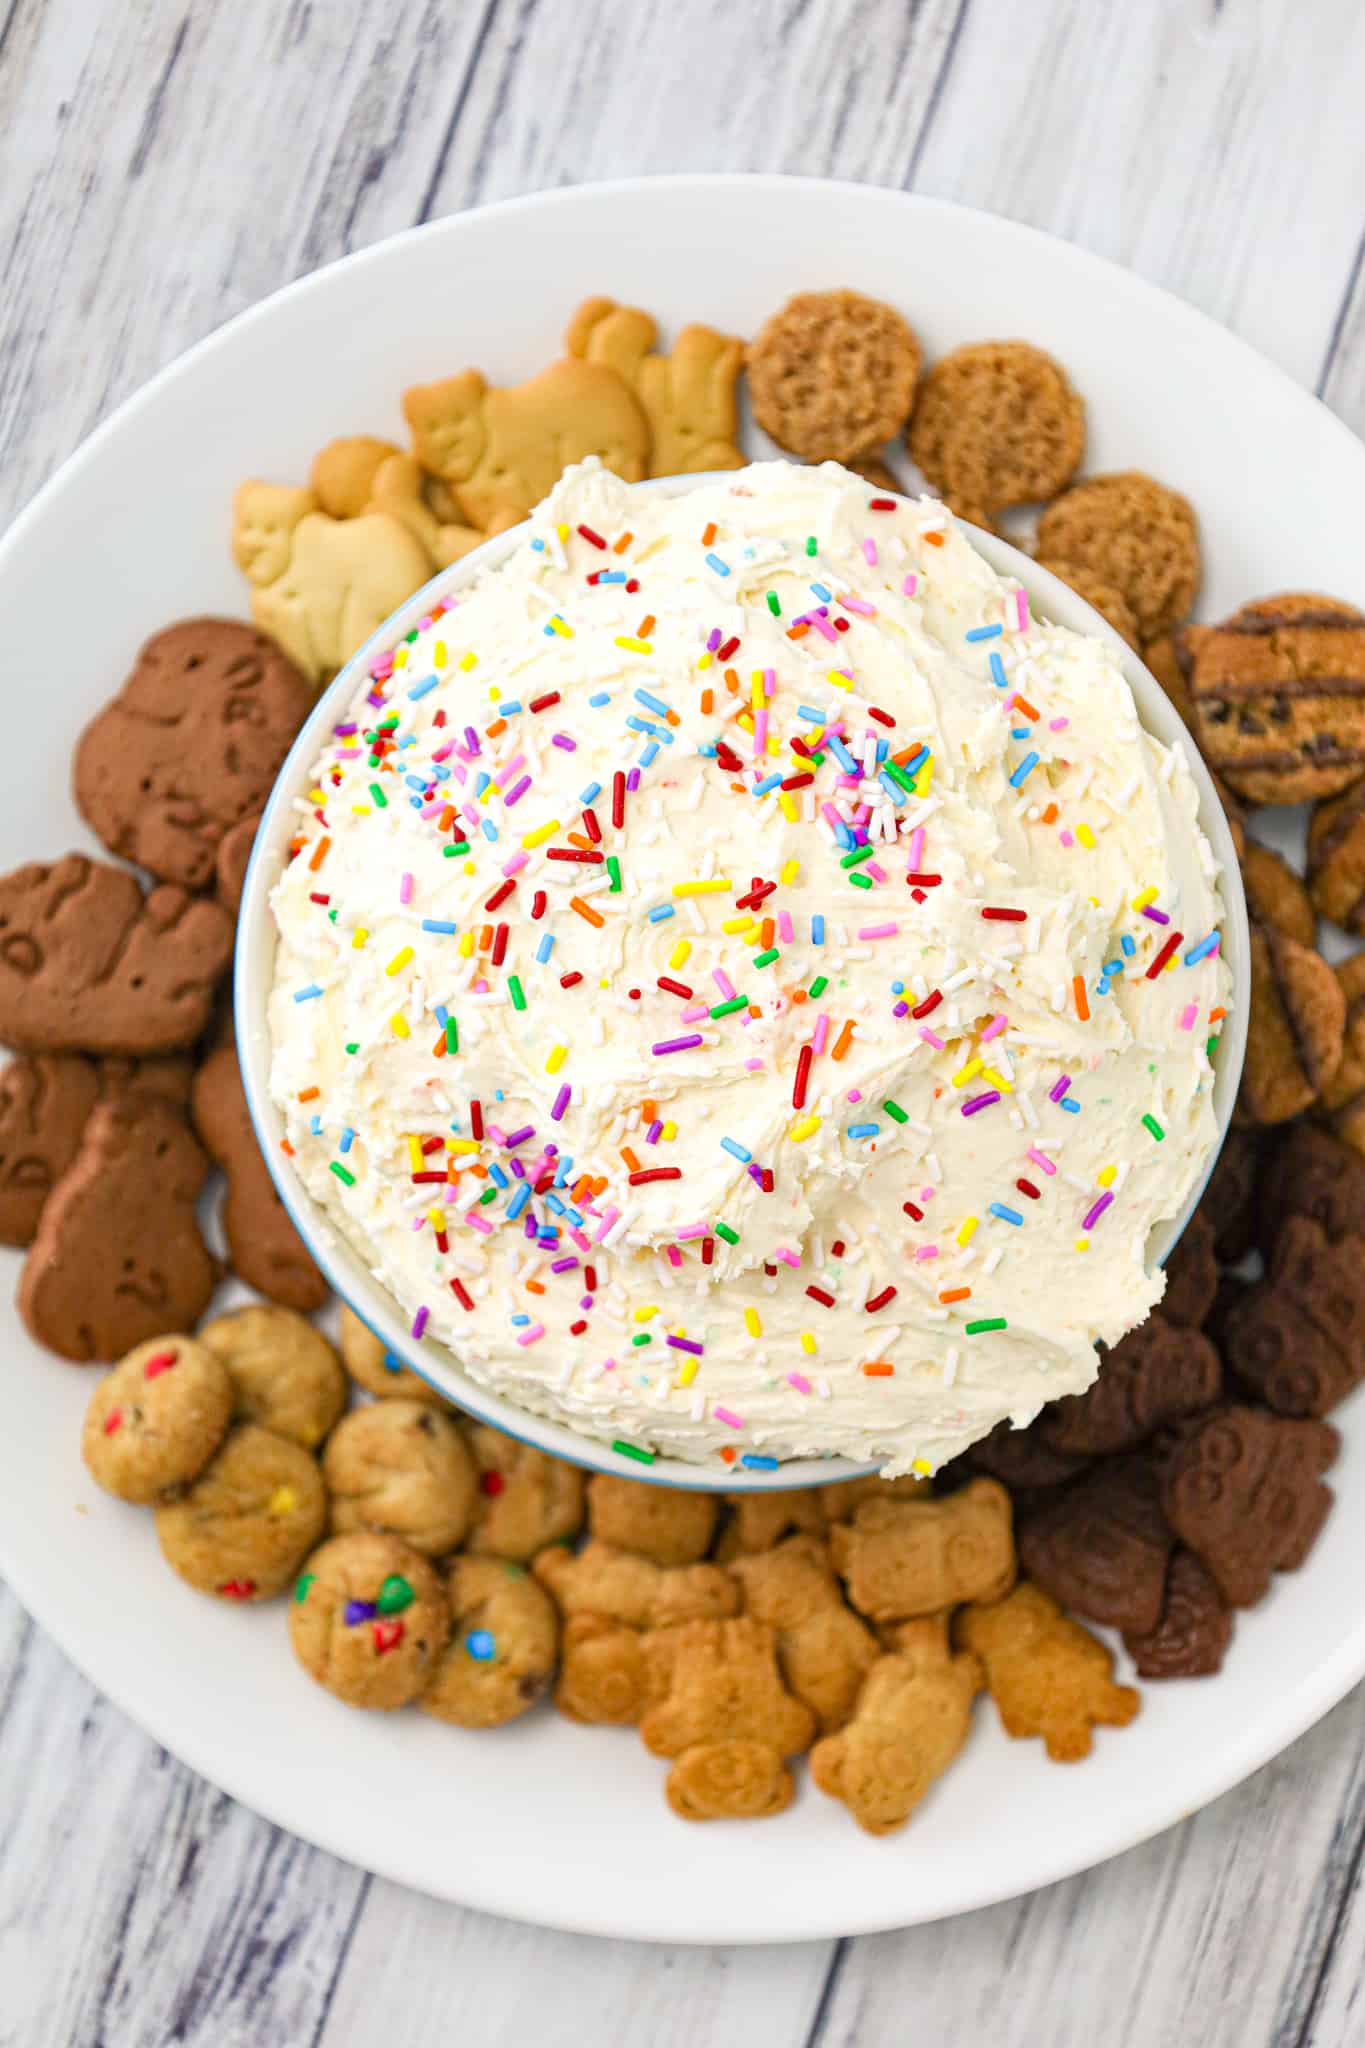 Dunkaroo Dip is a simple and delicious funfetti cake batter dip recipe that will remind you of the childhood treat.